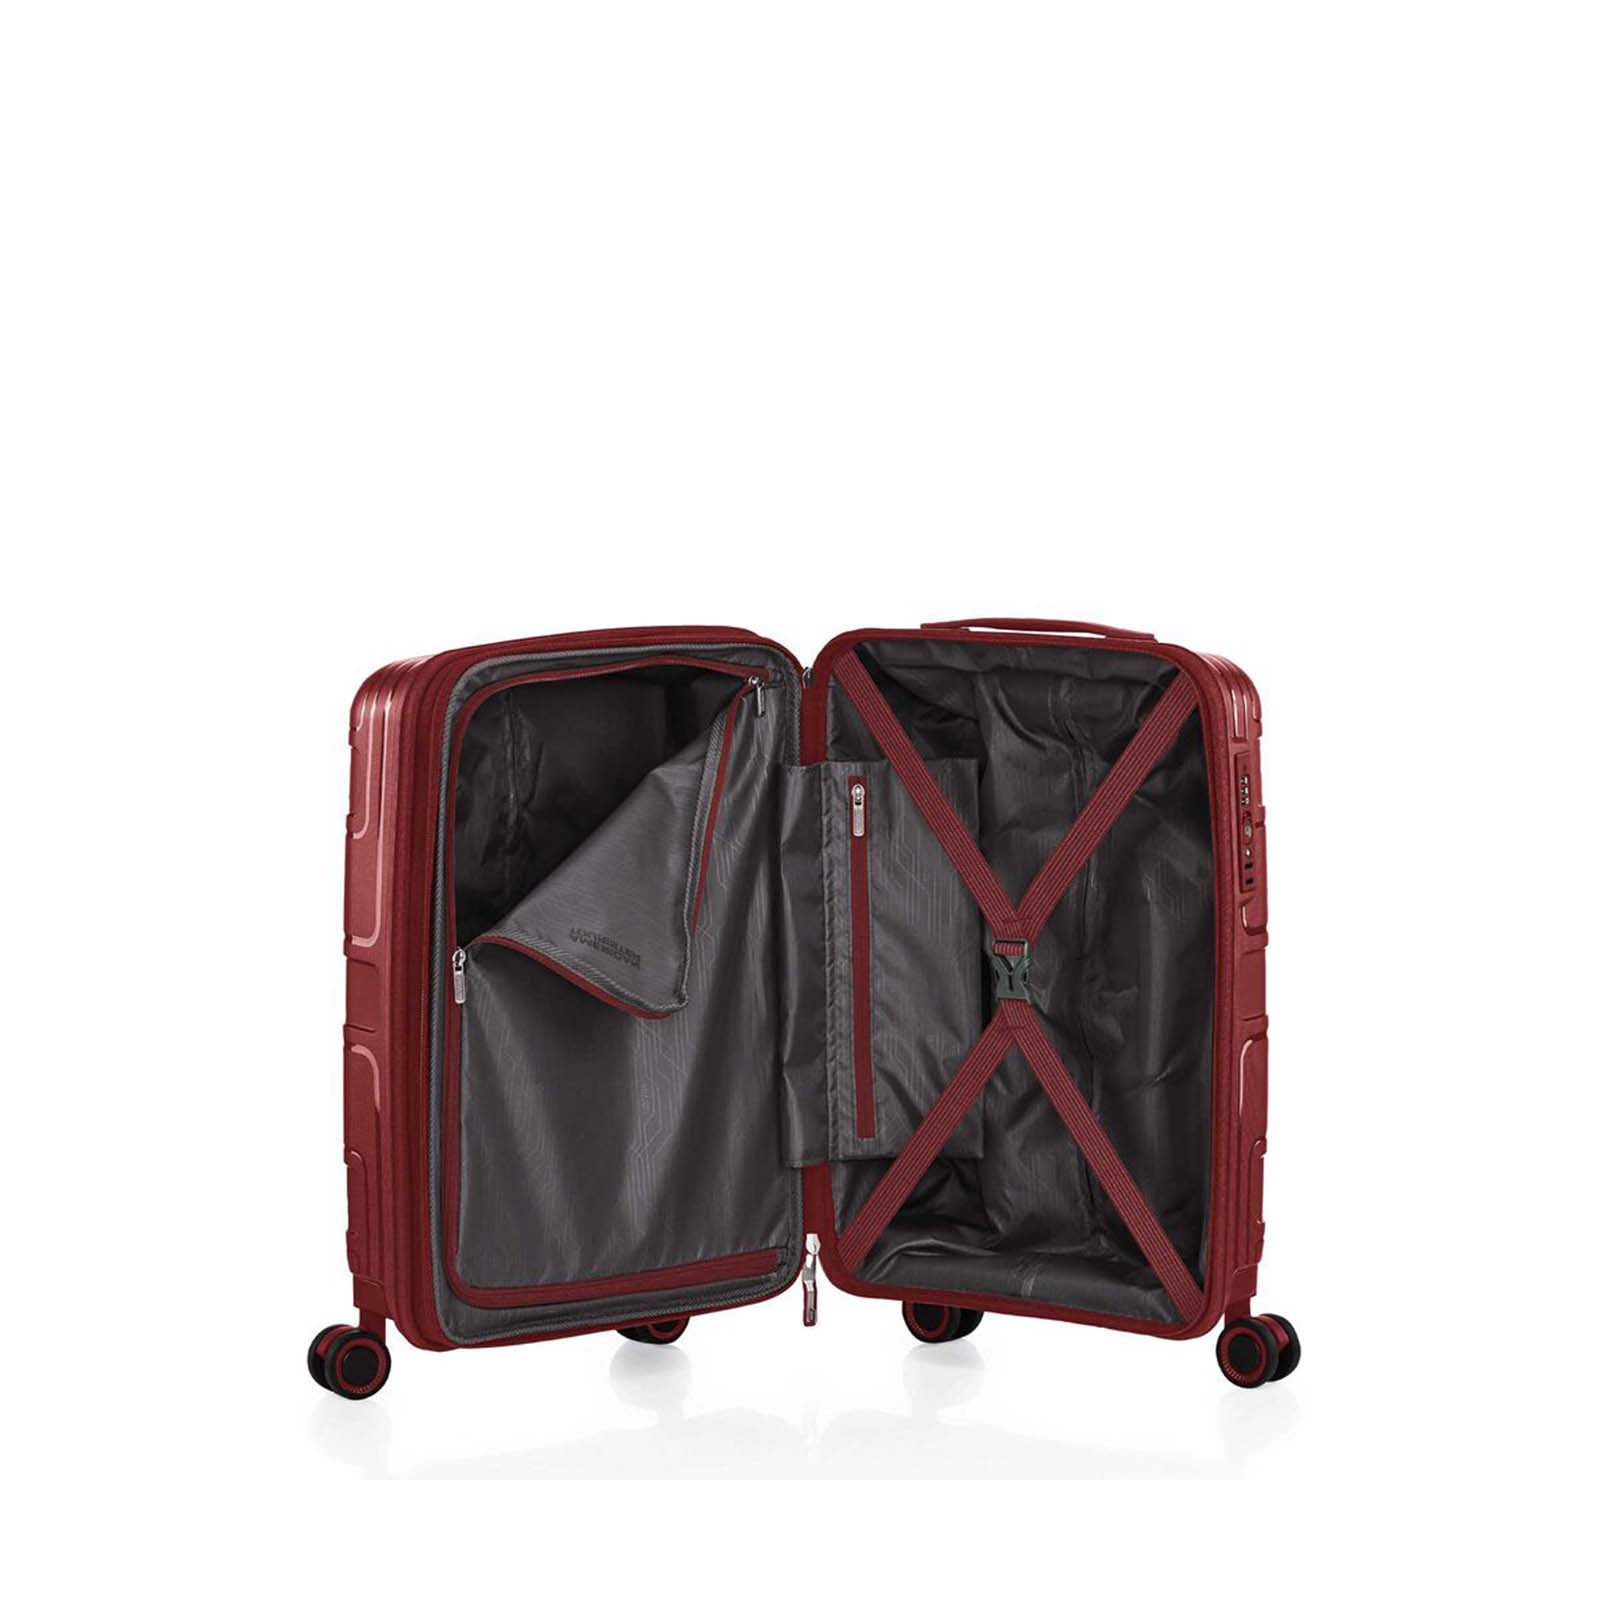 American-Tourister-Light-Max-55cm-Carry-On-Suitcase-Dahlia-Open